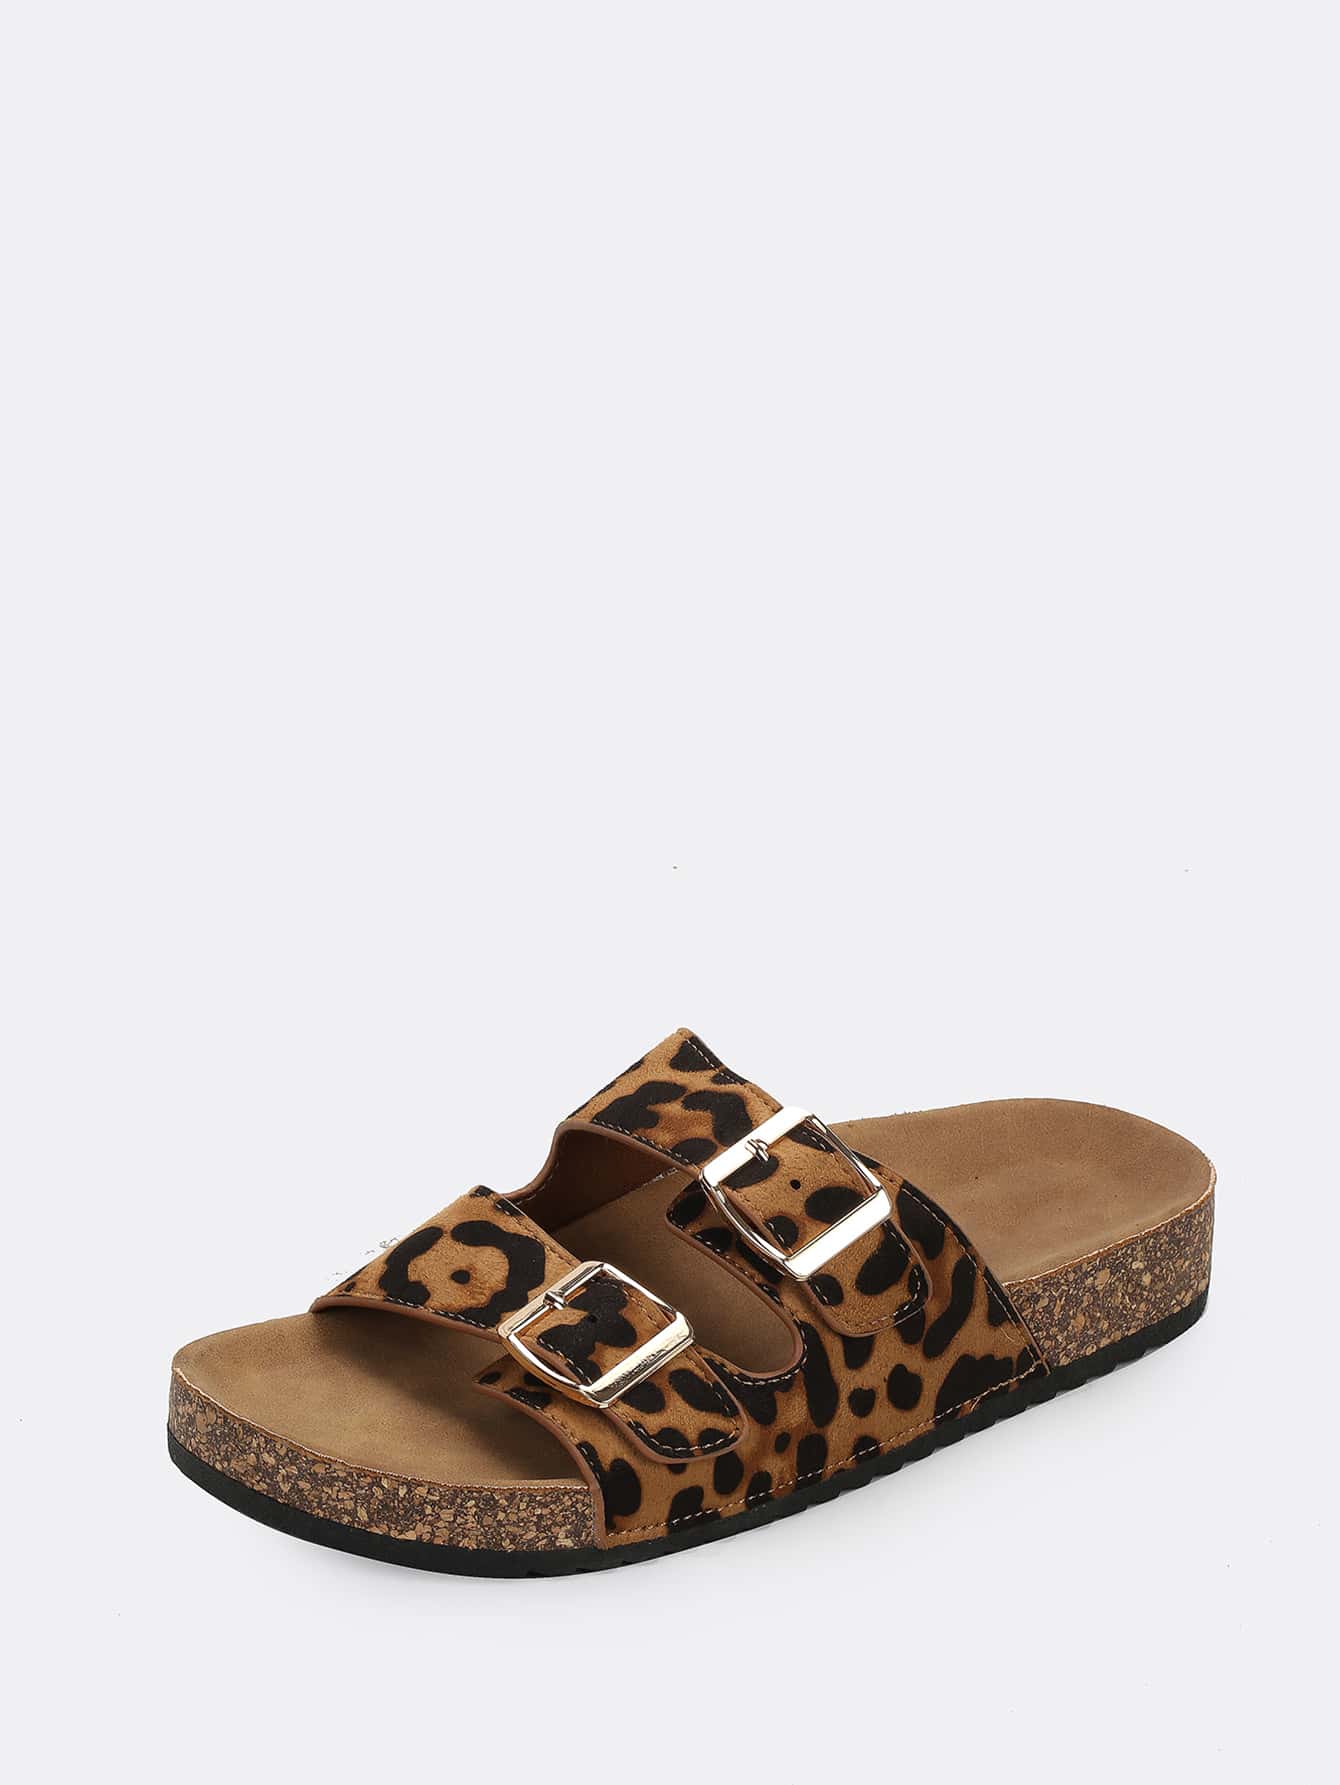 Fashionable Outdoors Slide Sandals For Women, Leopard Buckle Twin Strap Knit Open Toe Footbed Sandals